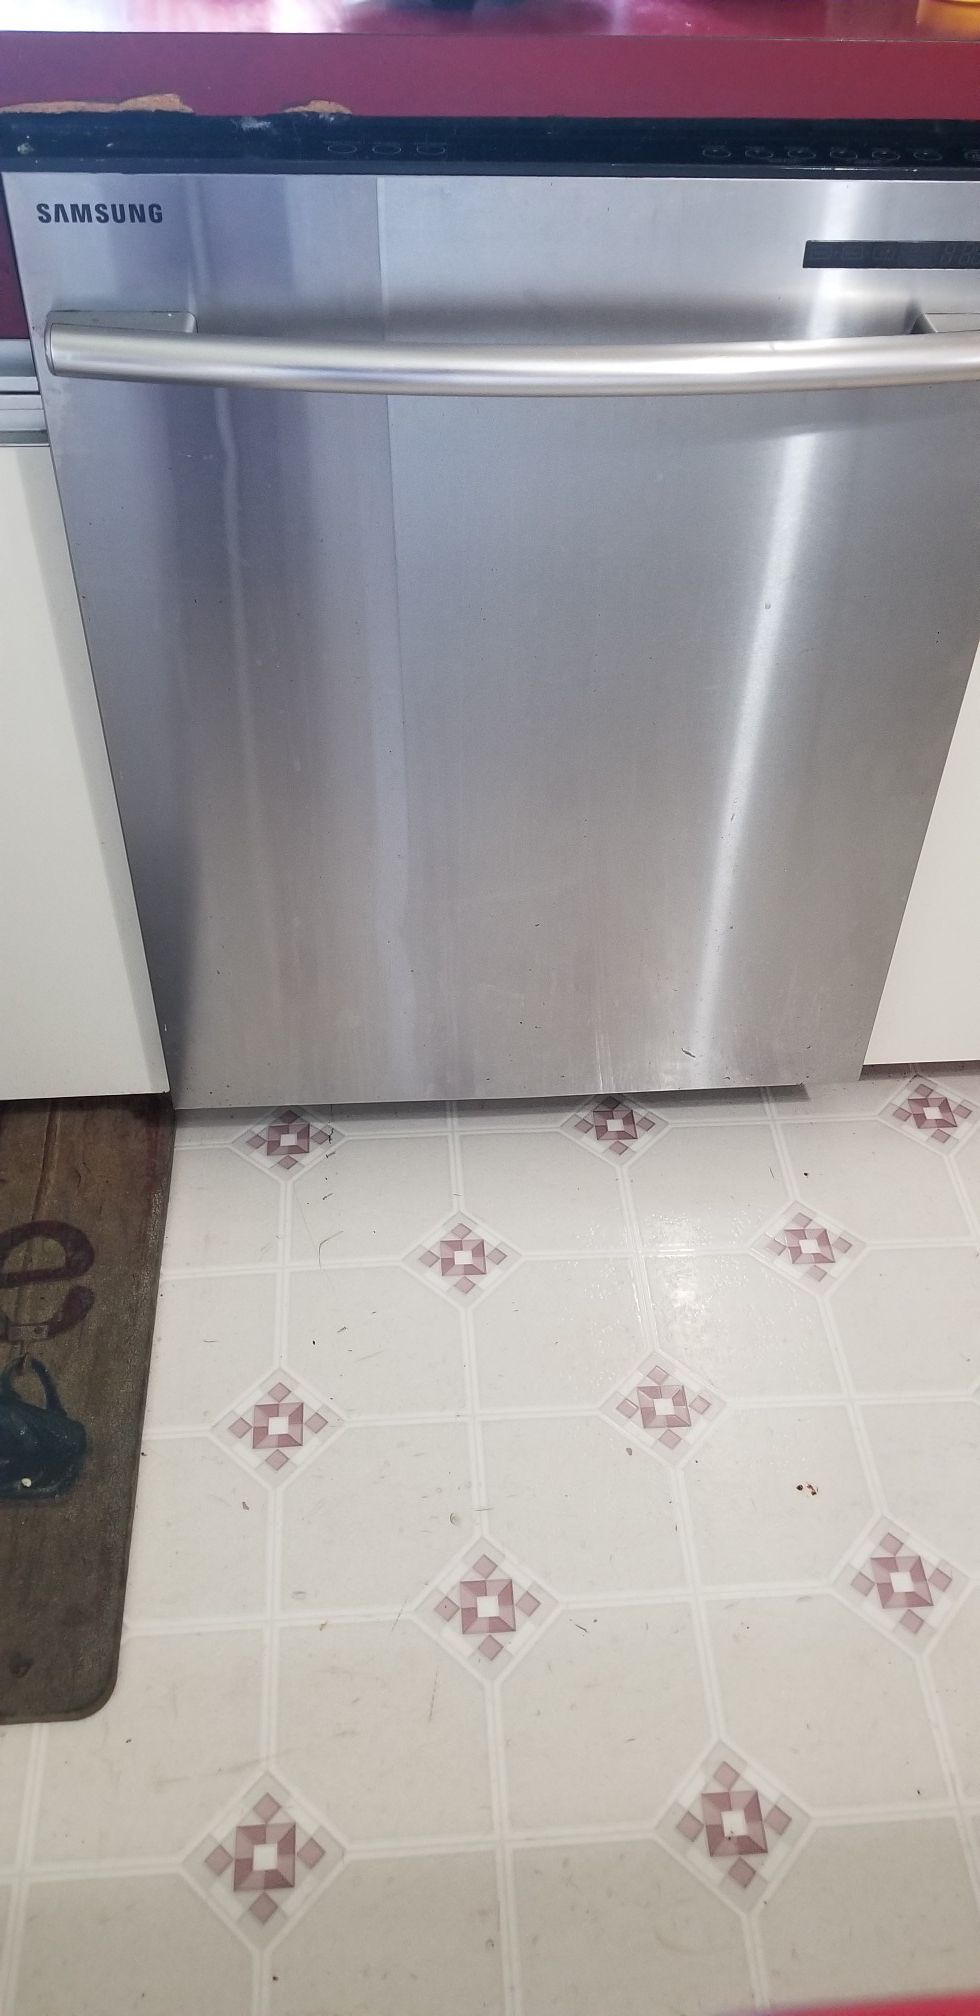 Samsung DMR77LHS stainless steel built in dishwasher (Needs a repair)